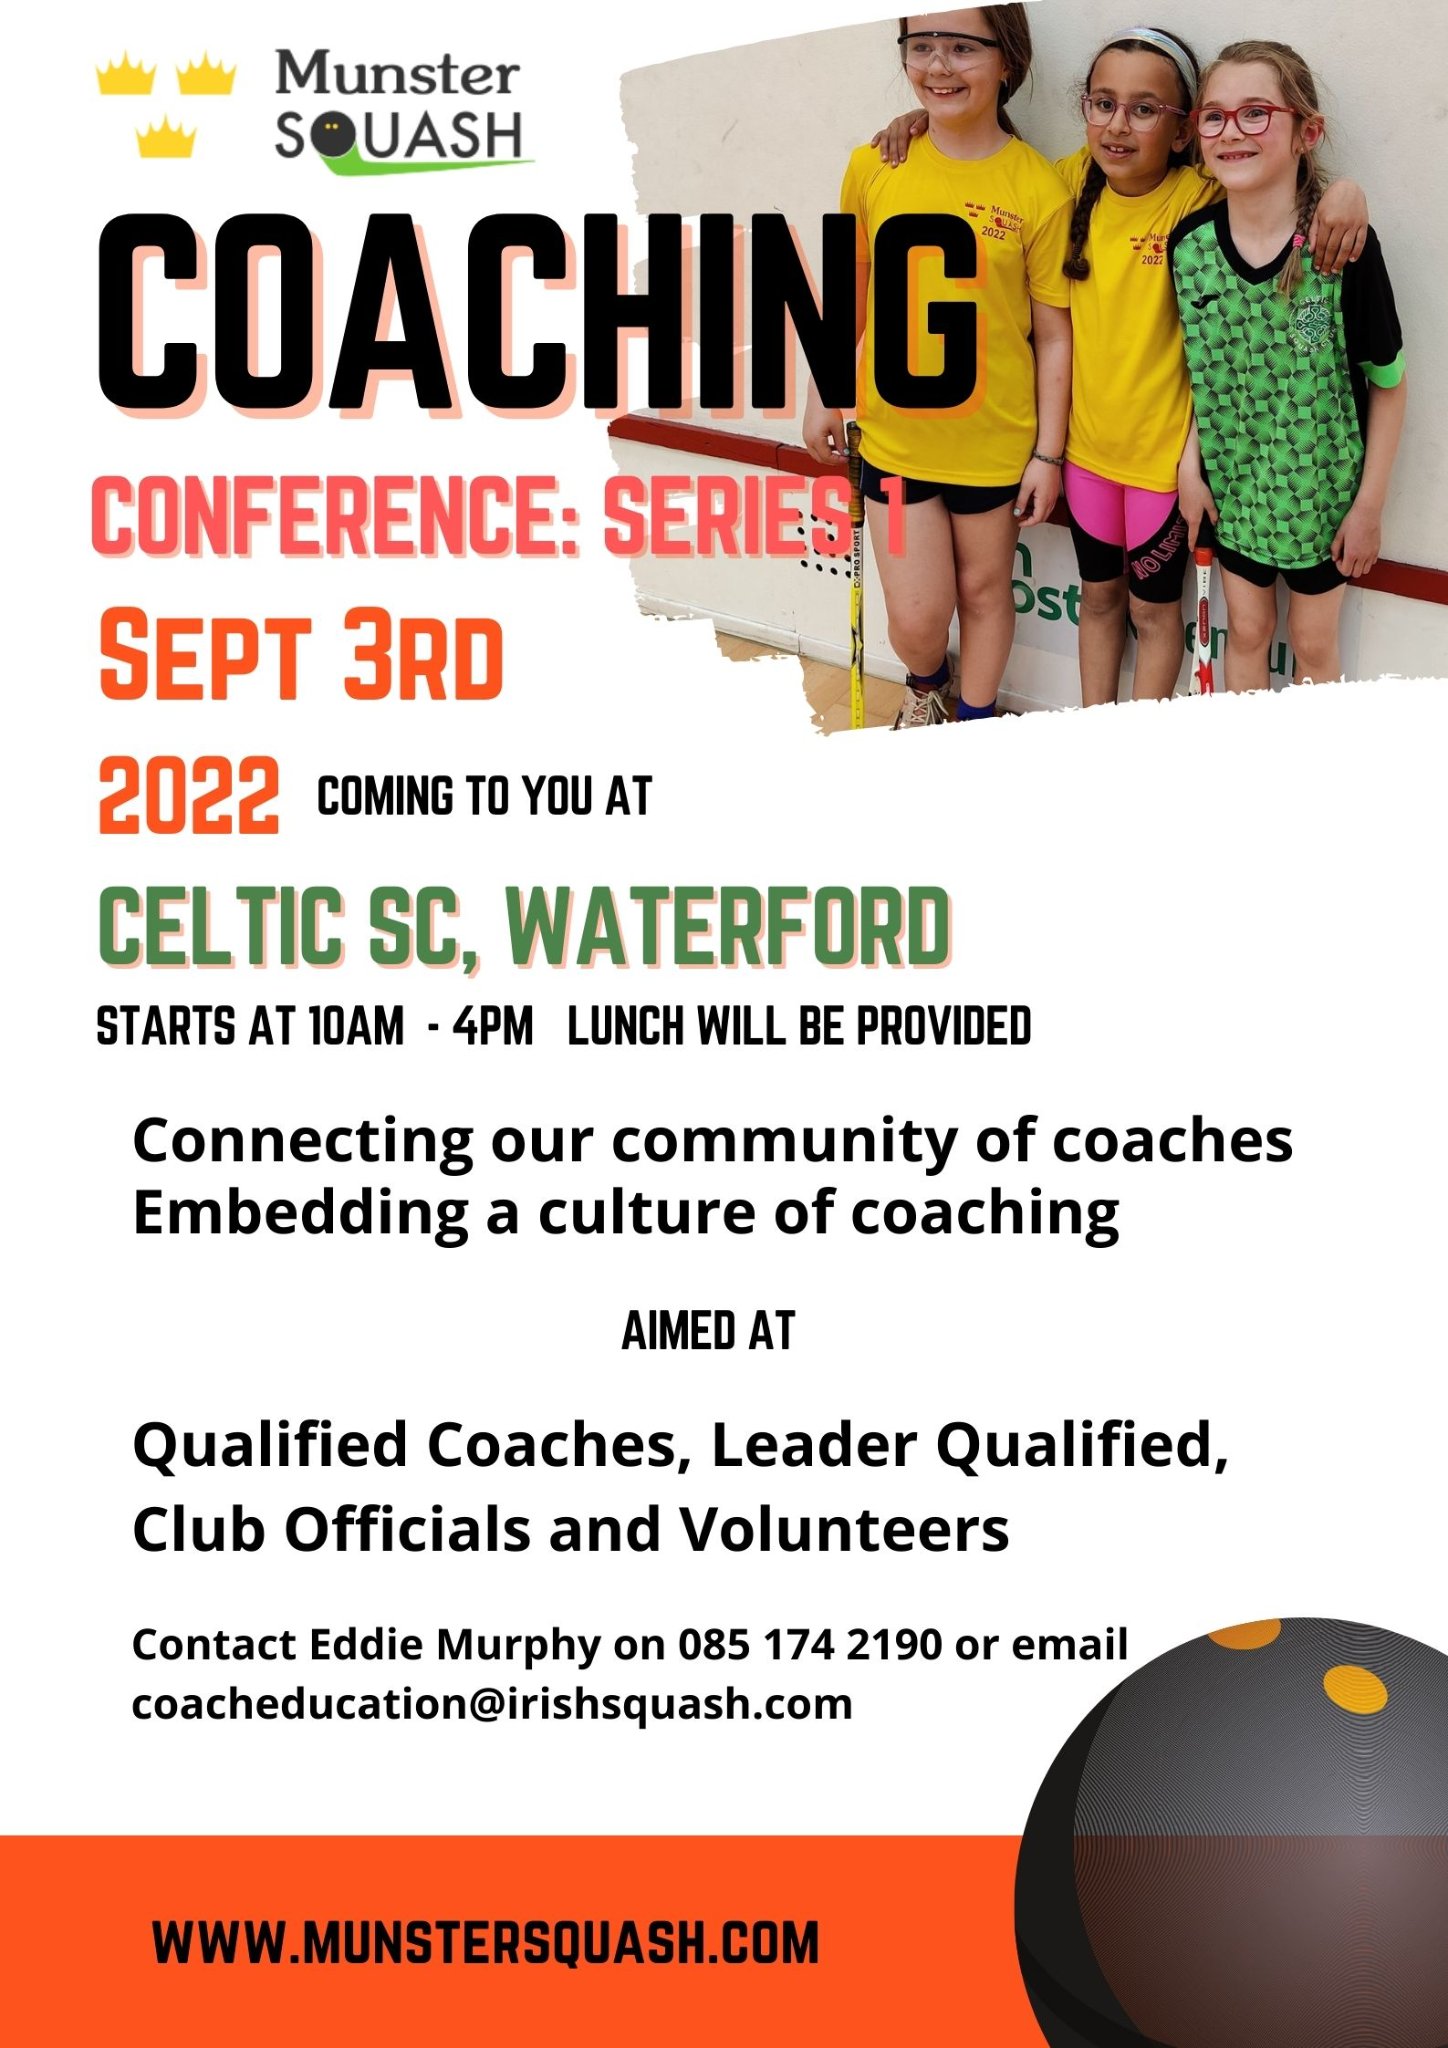 Coaches/Volunteers conference – Series 1